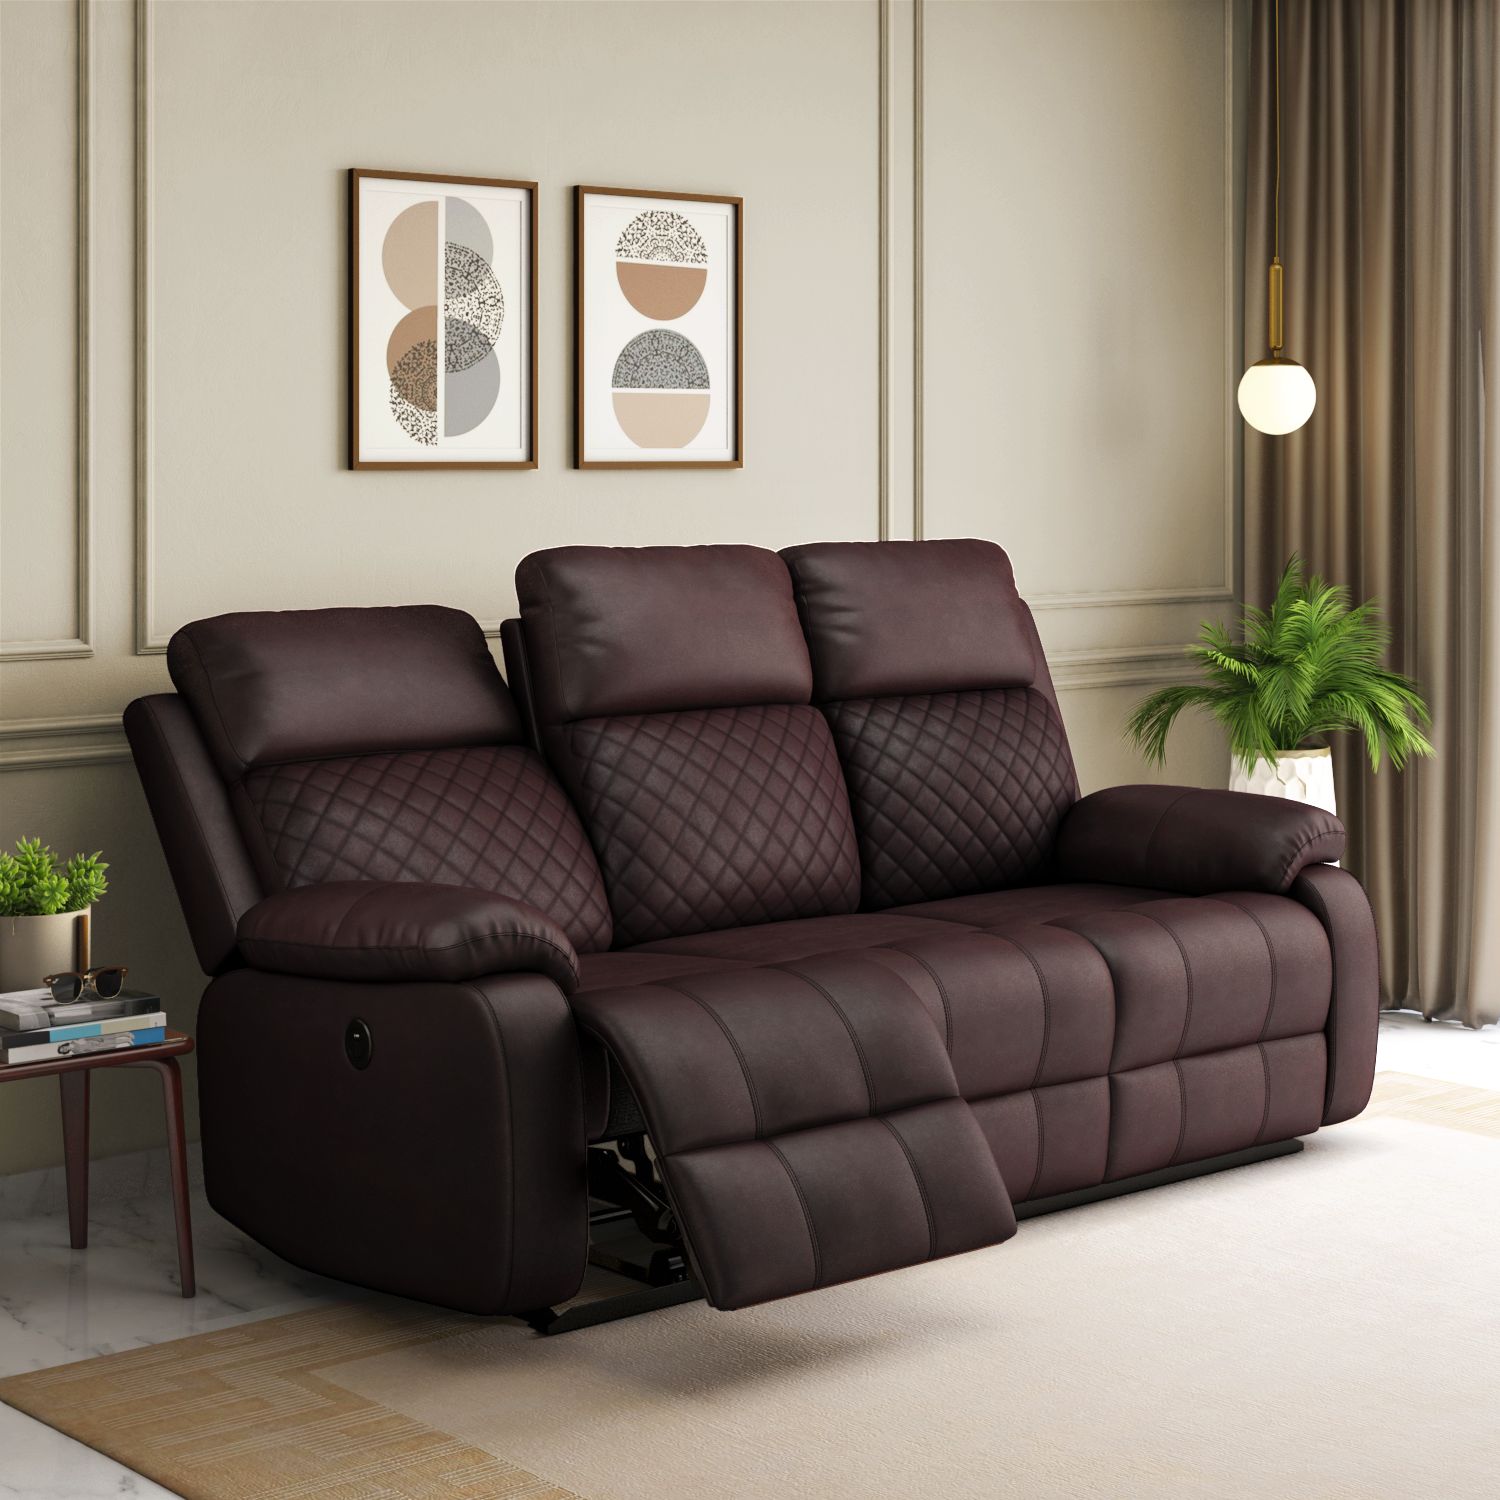 Dallas 3 Seater Fabric Electric Recliner (Brown)